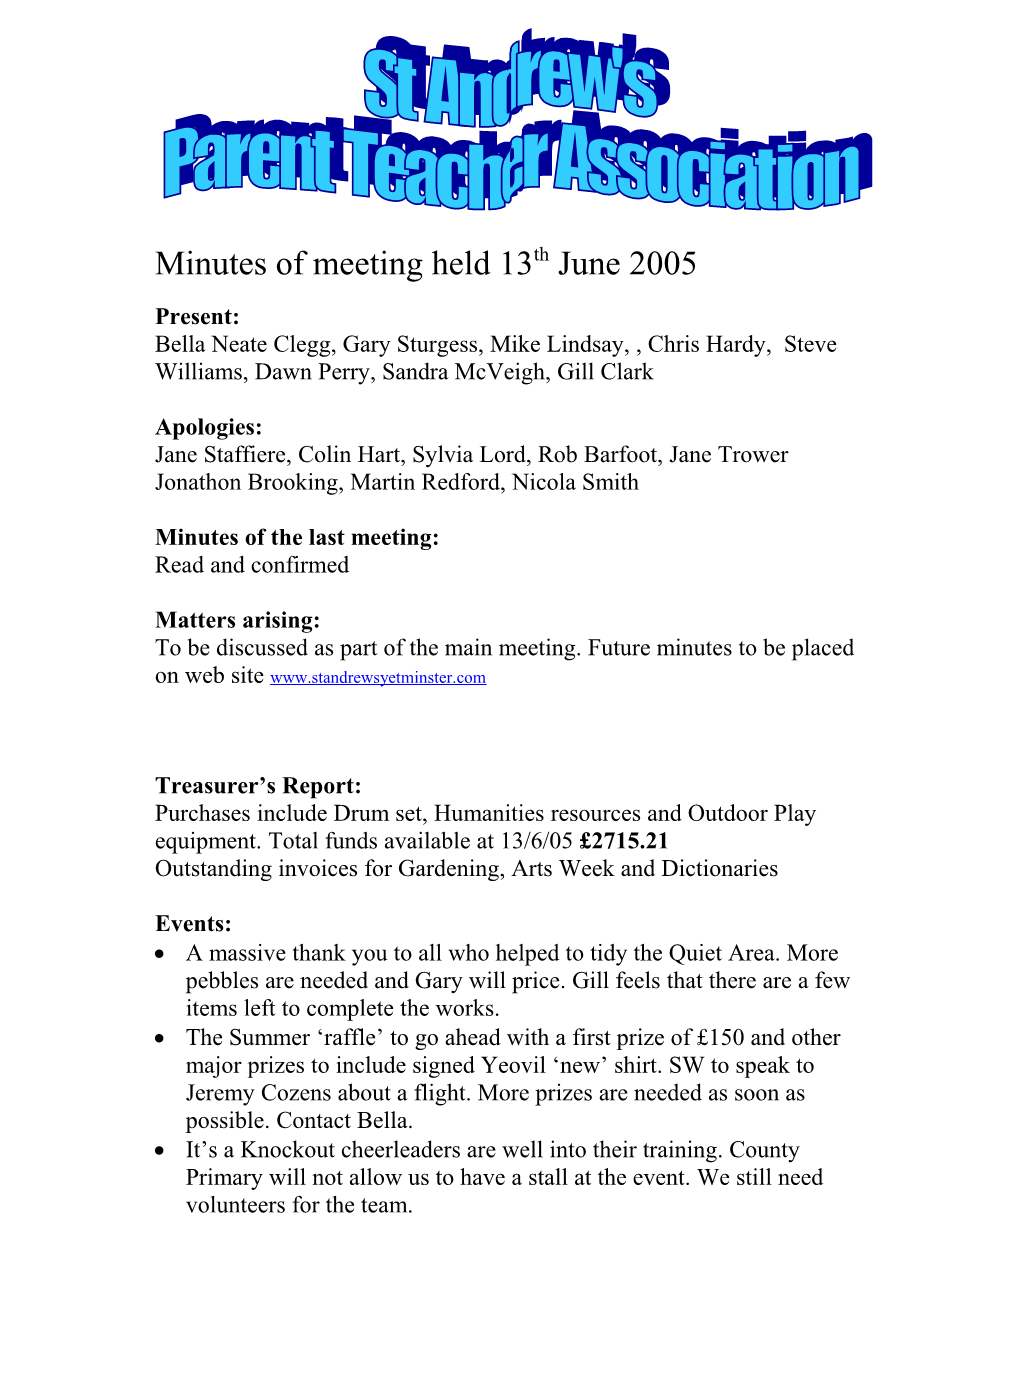 Minutes of Meeting Held 19Th April 2005